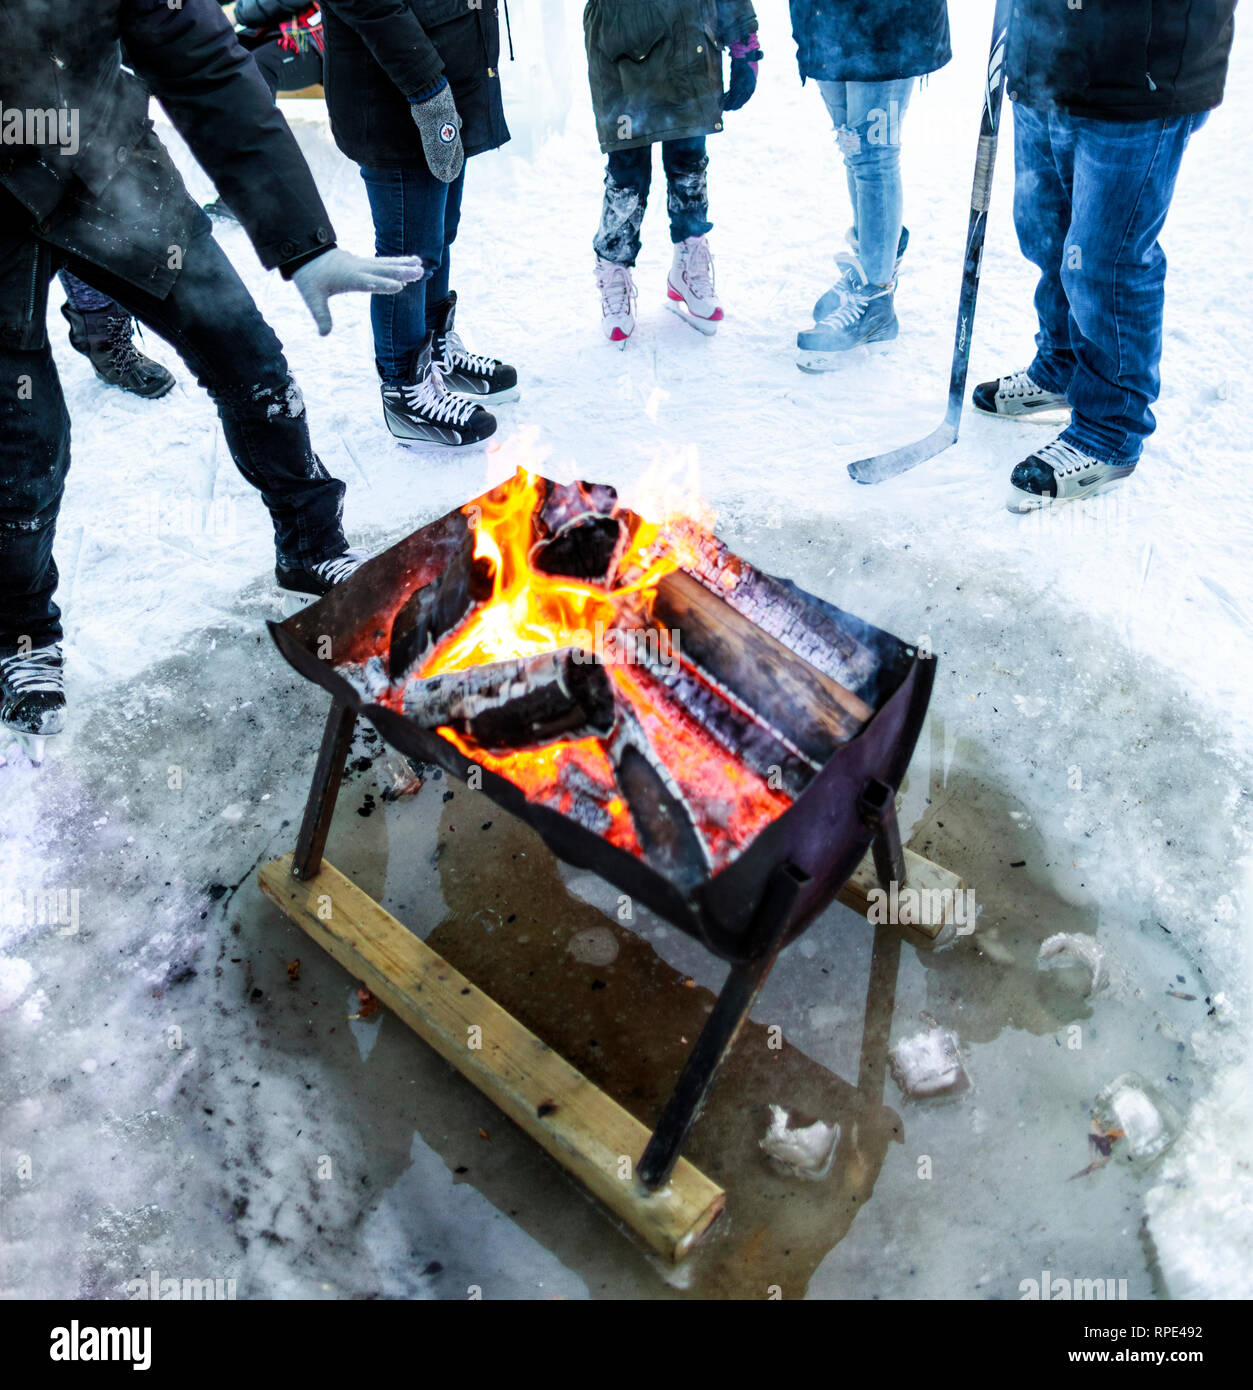 People warming up around an outdoor fire pit, wearing ice skates at The Forks, Winnipeg, Manitoba, Canada. Stock Photo